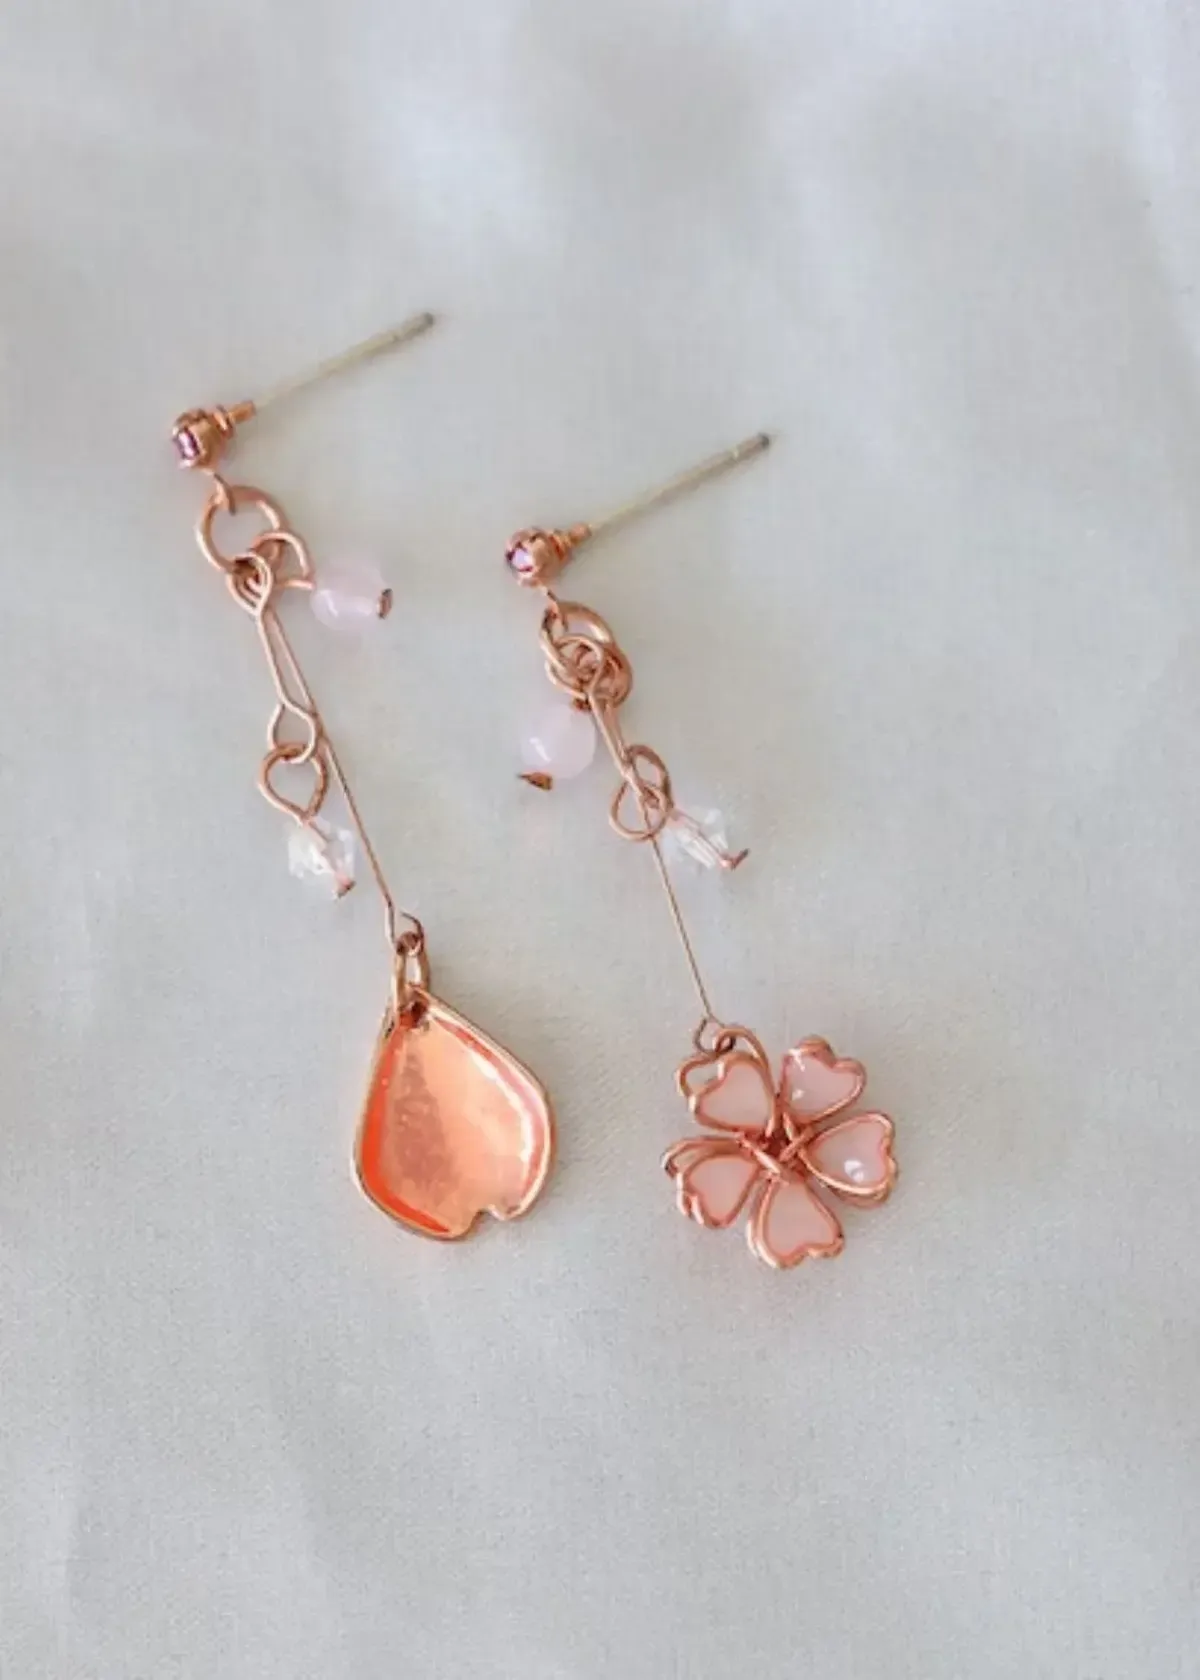 What Materials Are Used to Make Cherry Blossom Earrings?